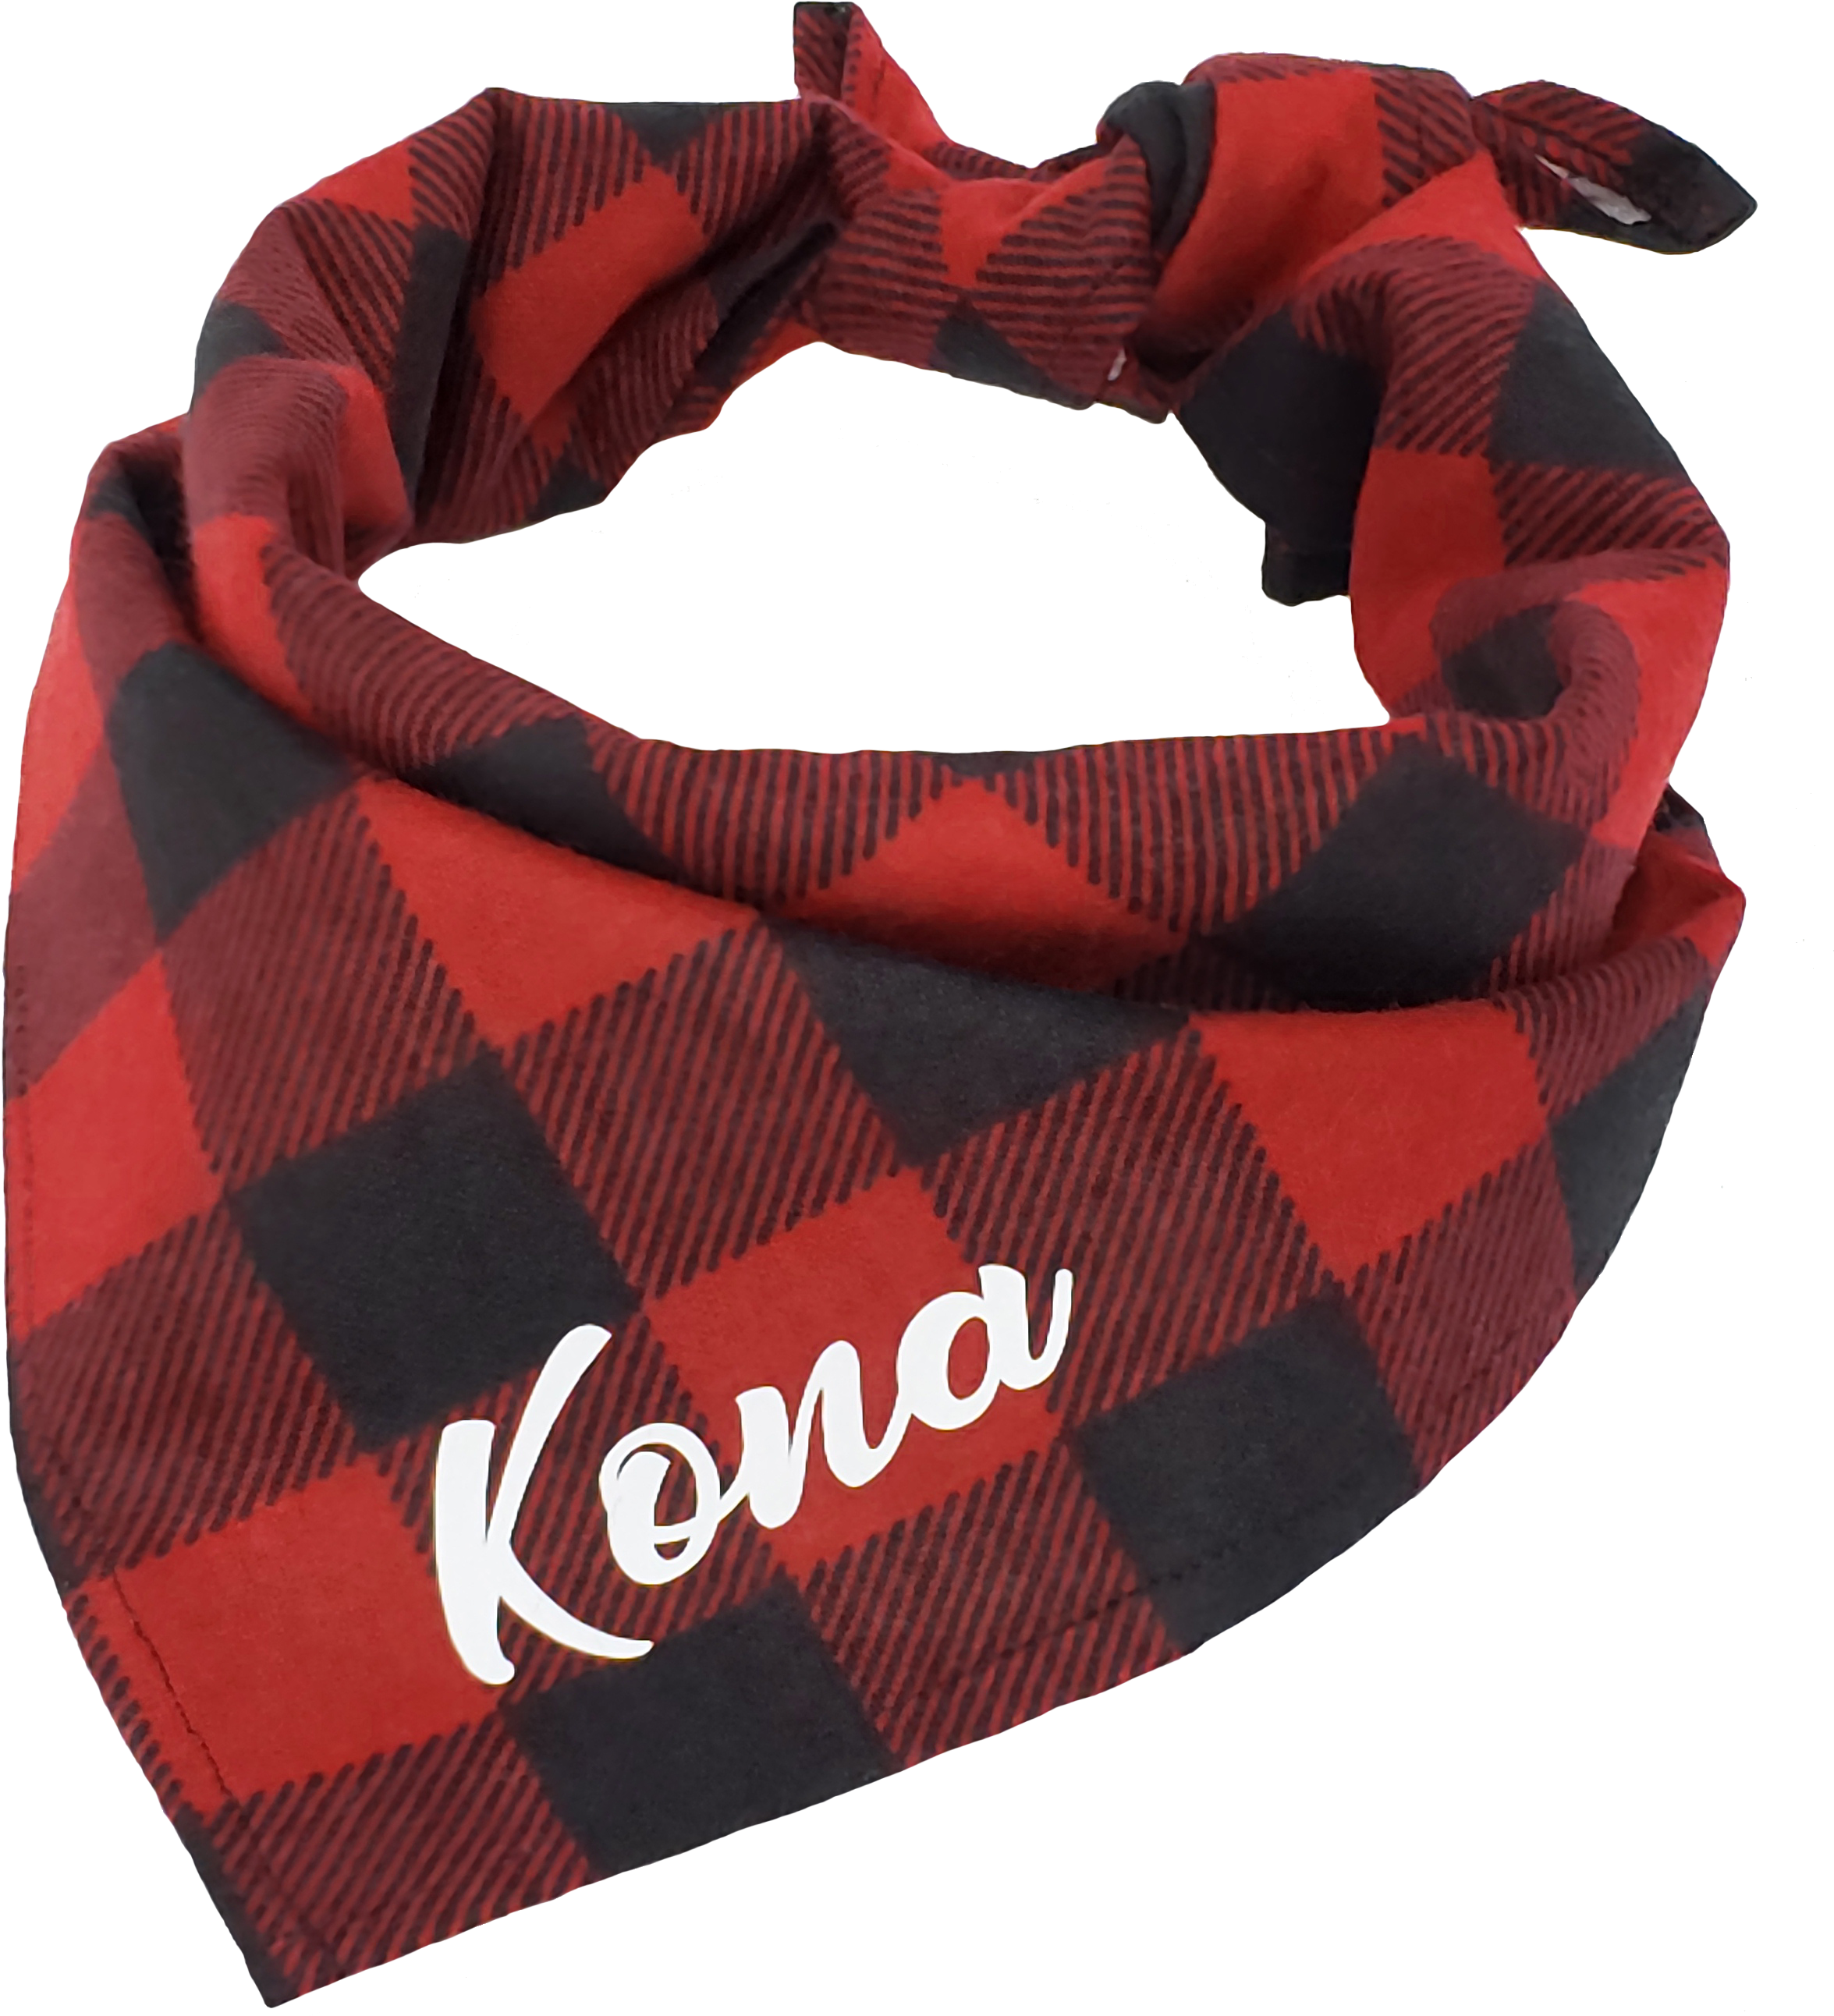 A Red And Black Bandana With A White Text